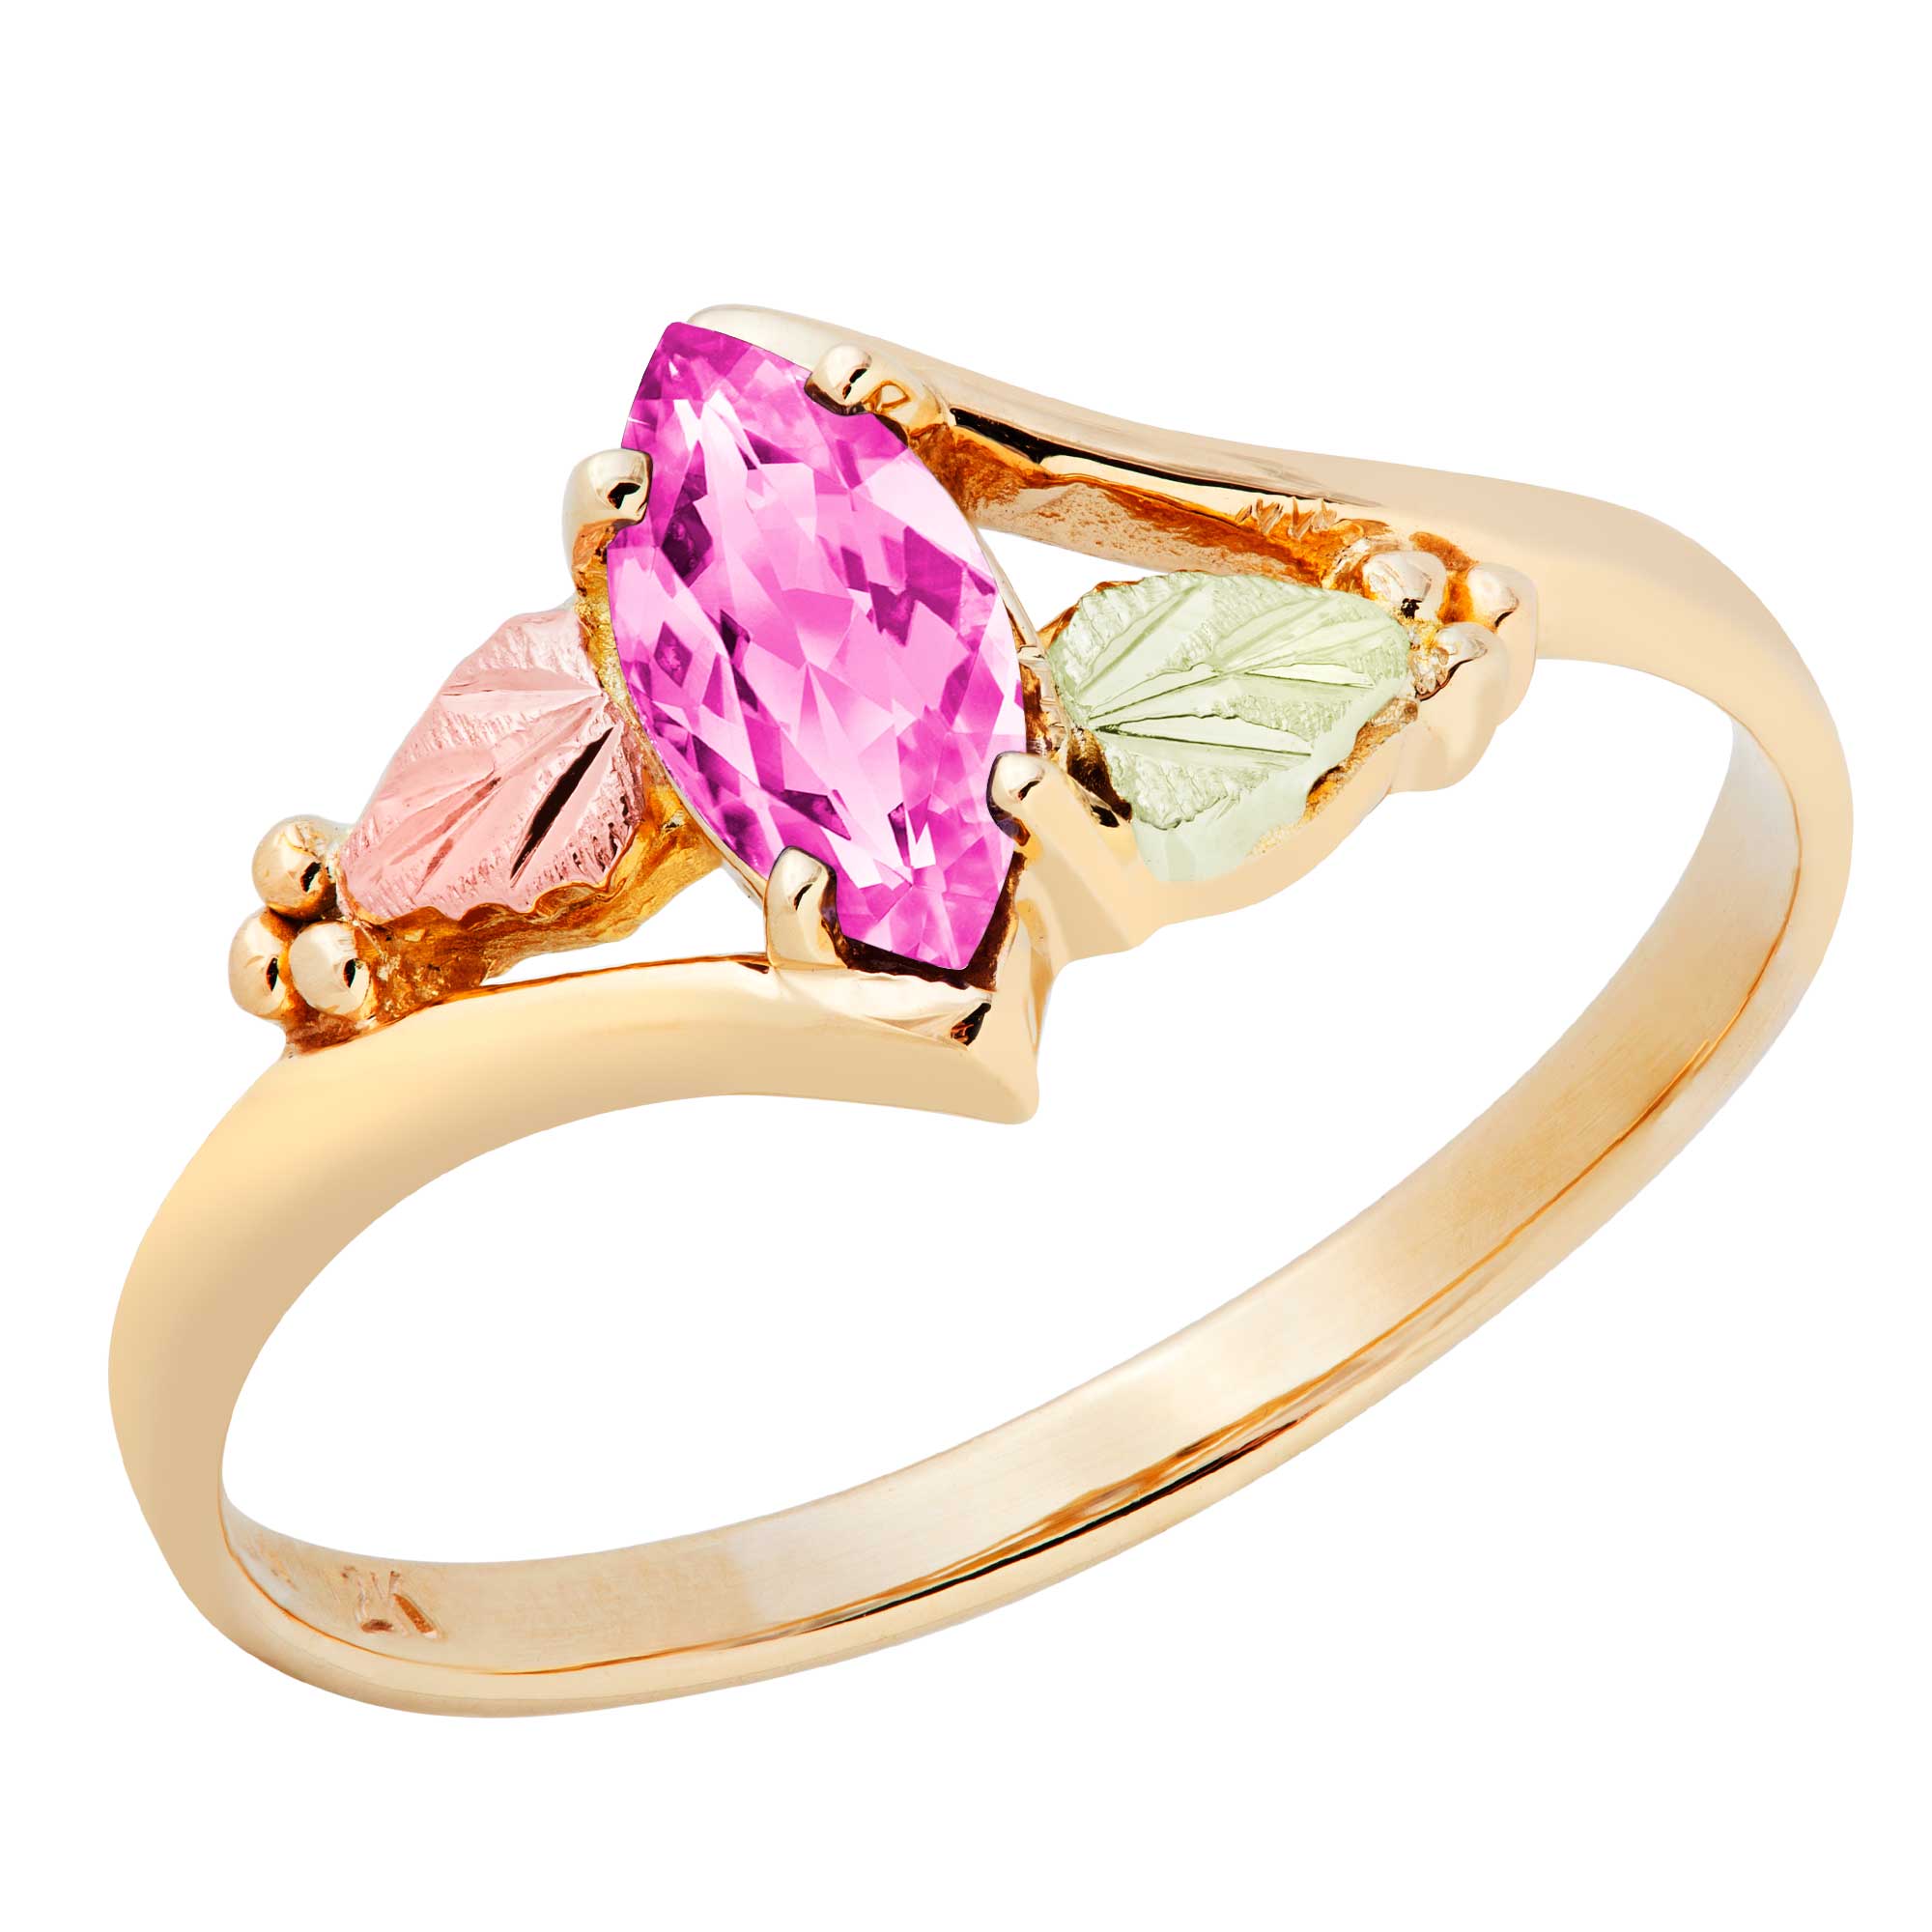 Created Rose Zircon Marquise October Birthstone Bypass Ring, Black Hills Gold motif. 